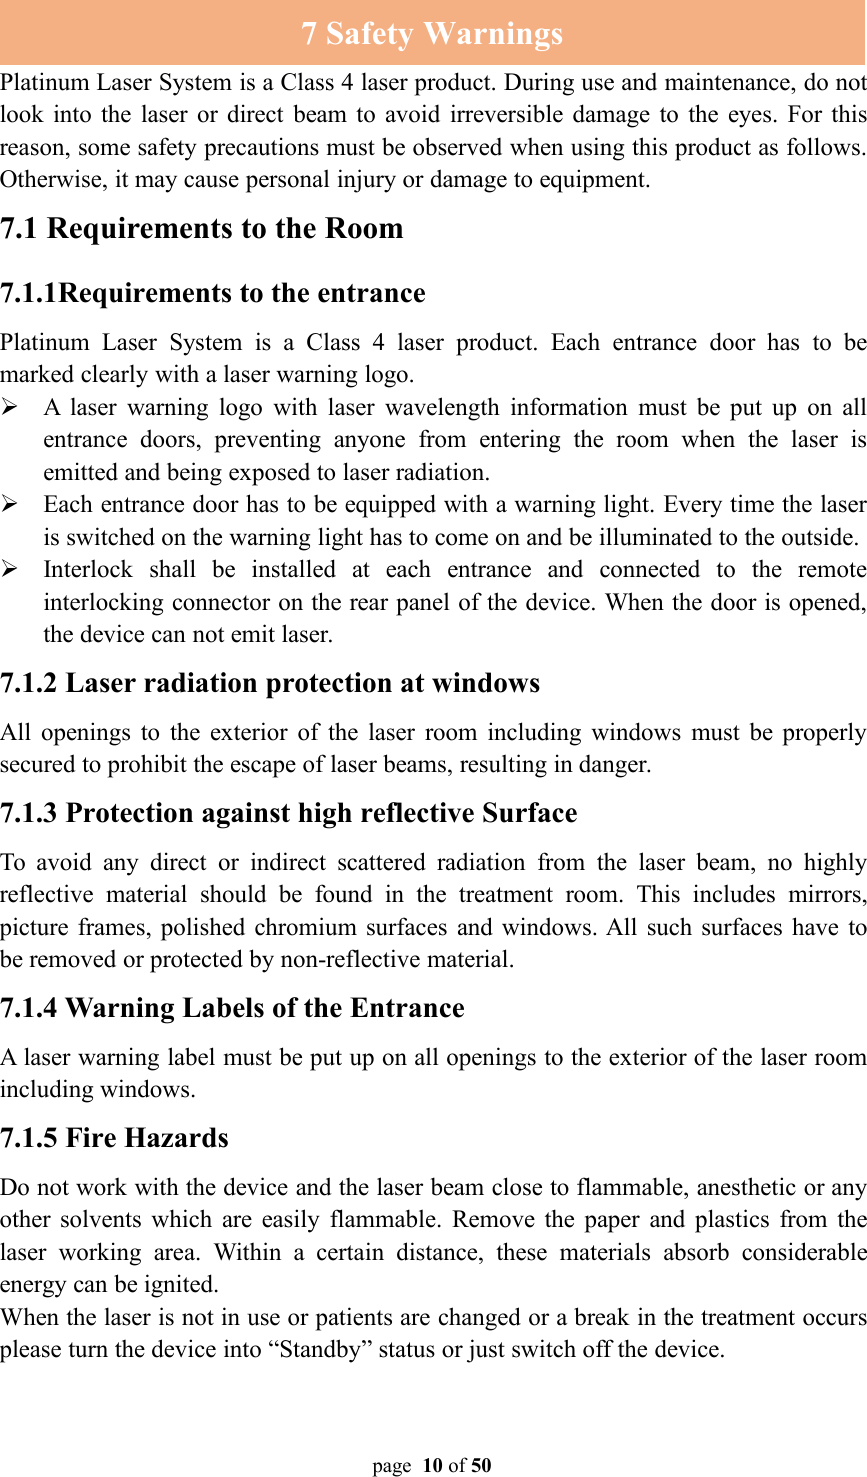 page 10 of 507 Safety WarningsPlatinum Laser System is a Class 4 laser product. During use and maintenance, do notlook into the laser or direct beam to avoid irreversible damage to the eyes. For thisreason, some safety precautions must be observed when using this product as follows.Otherwise, it may cause personal injury or damage to equipment.7.1 Requirements to the Room7.1.1Requirements to the entrancePlatinum Laser System is a Class 4 laser product. Each entrance door has to bemarked clearly with a laser warning logo.A laser warning logo with laser wavelength information must be put up on allentrance doors, preventing anyone from entering the room when the laser isemitted and being exposed to laser radiation.Each entrance door has to be equipped with a warning light. Every time the laseris switched on the warning light has to come on and be illuminated to the outside.Interlock shall be installed at each entrance and connected to the remoteinterlocking connector on the rear panel of the device. When the door is opened,the device can not emit laser.7.1.2 Laser radiation protection at windowsAll openings to the exterior of the laser room including windows must be properlysecured to prohibit the escape of laser beams, resulting in danger.7.1.3 Protection against high reflective SurfaceTo avoid any direct or indirect scattered radiation from the laser beam, no highlyreflective material should be found in the treatment room. This includes mirrors,picture frames, polished chromium surfaces and windows. All such surfaces have tobe removed or protected by non-reflective material.7.1.4 Warning Labels of the EntranceA laser warning label must be put up on all openings to the exterior of the laser roomincluding windows.7.1.5 Fire HazardsDo not work with the device and the laser beam close to flammable, anesthetic or anyother solvents which are easily flammable. Remove the paper and plastics from thelaser working area. Within a certain distance, these materials absorb considerableenergy can be ignited.When the laser is not in use or patients are changed or a break in the treatment occursplease turn the device into “Standby” status or just switch off the device.